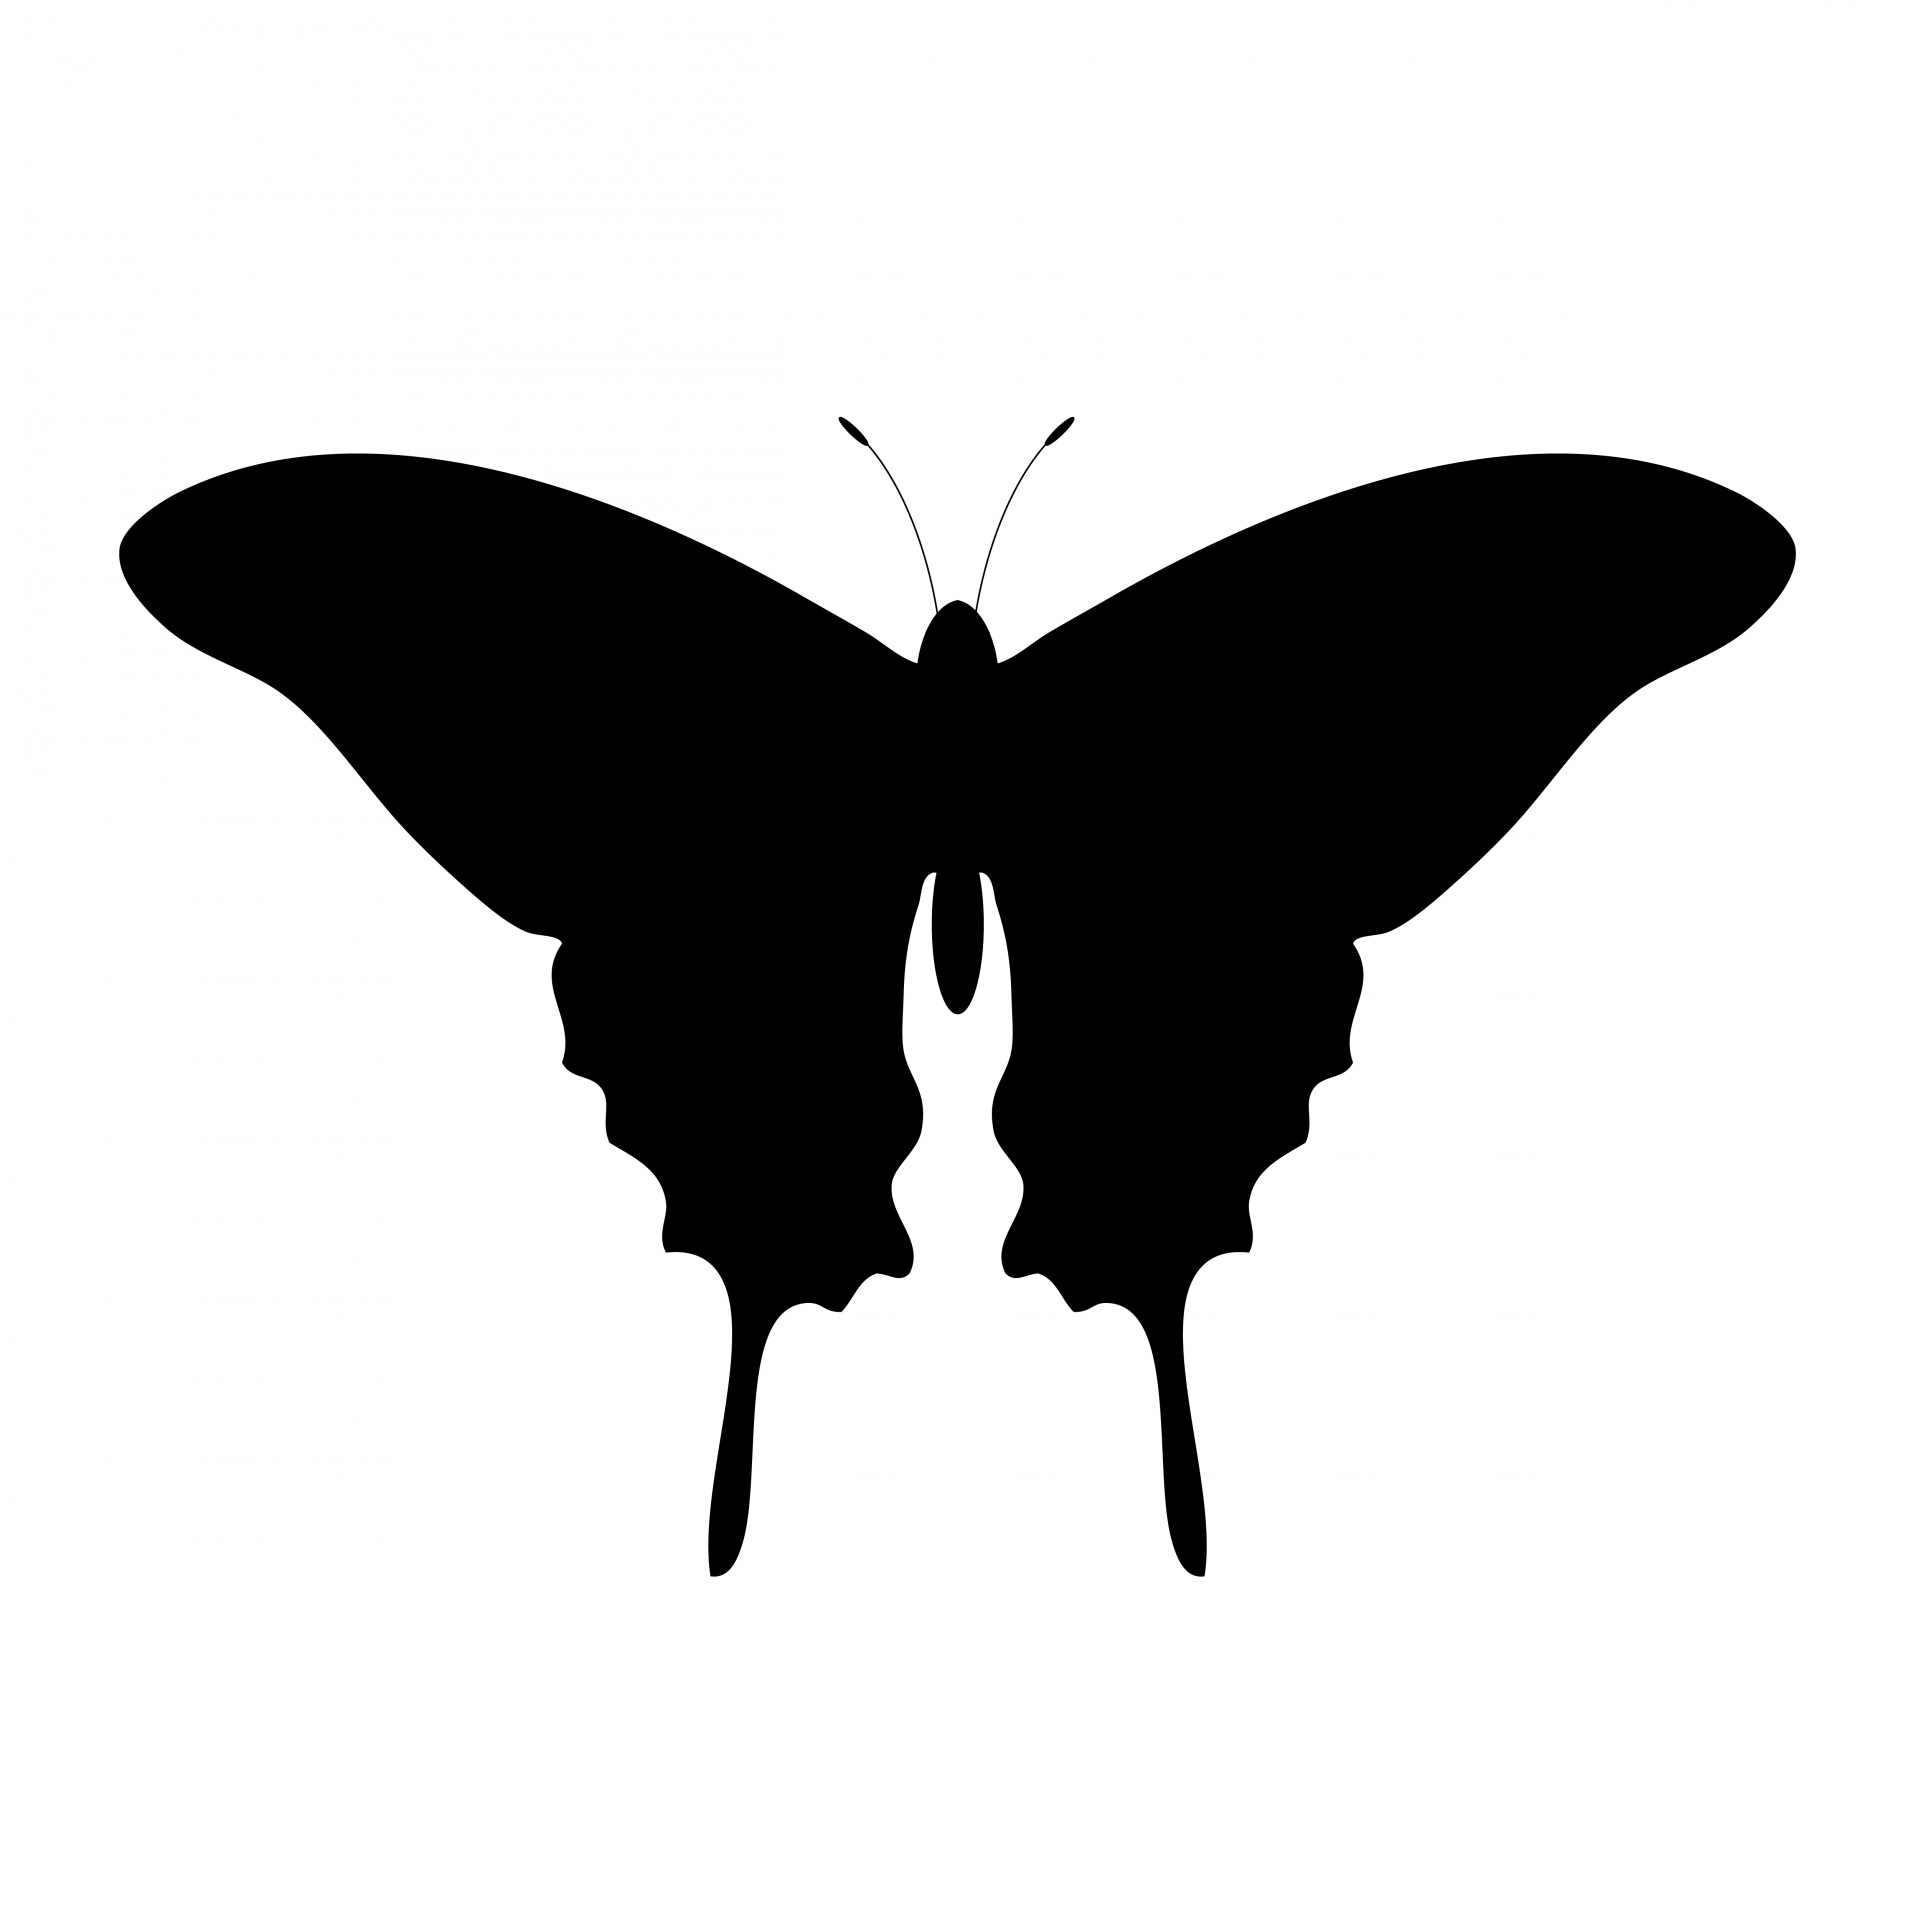 Butterfly Silhouette Clipart Free Stock Photo - Public Domain Pictures